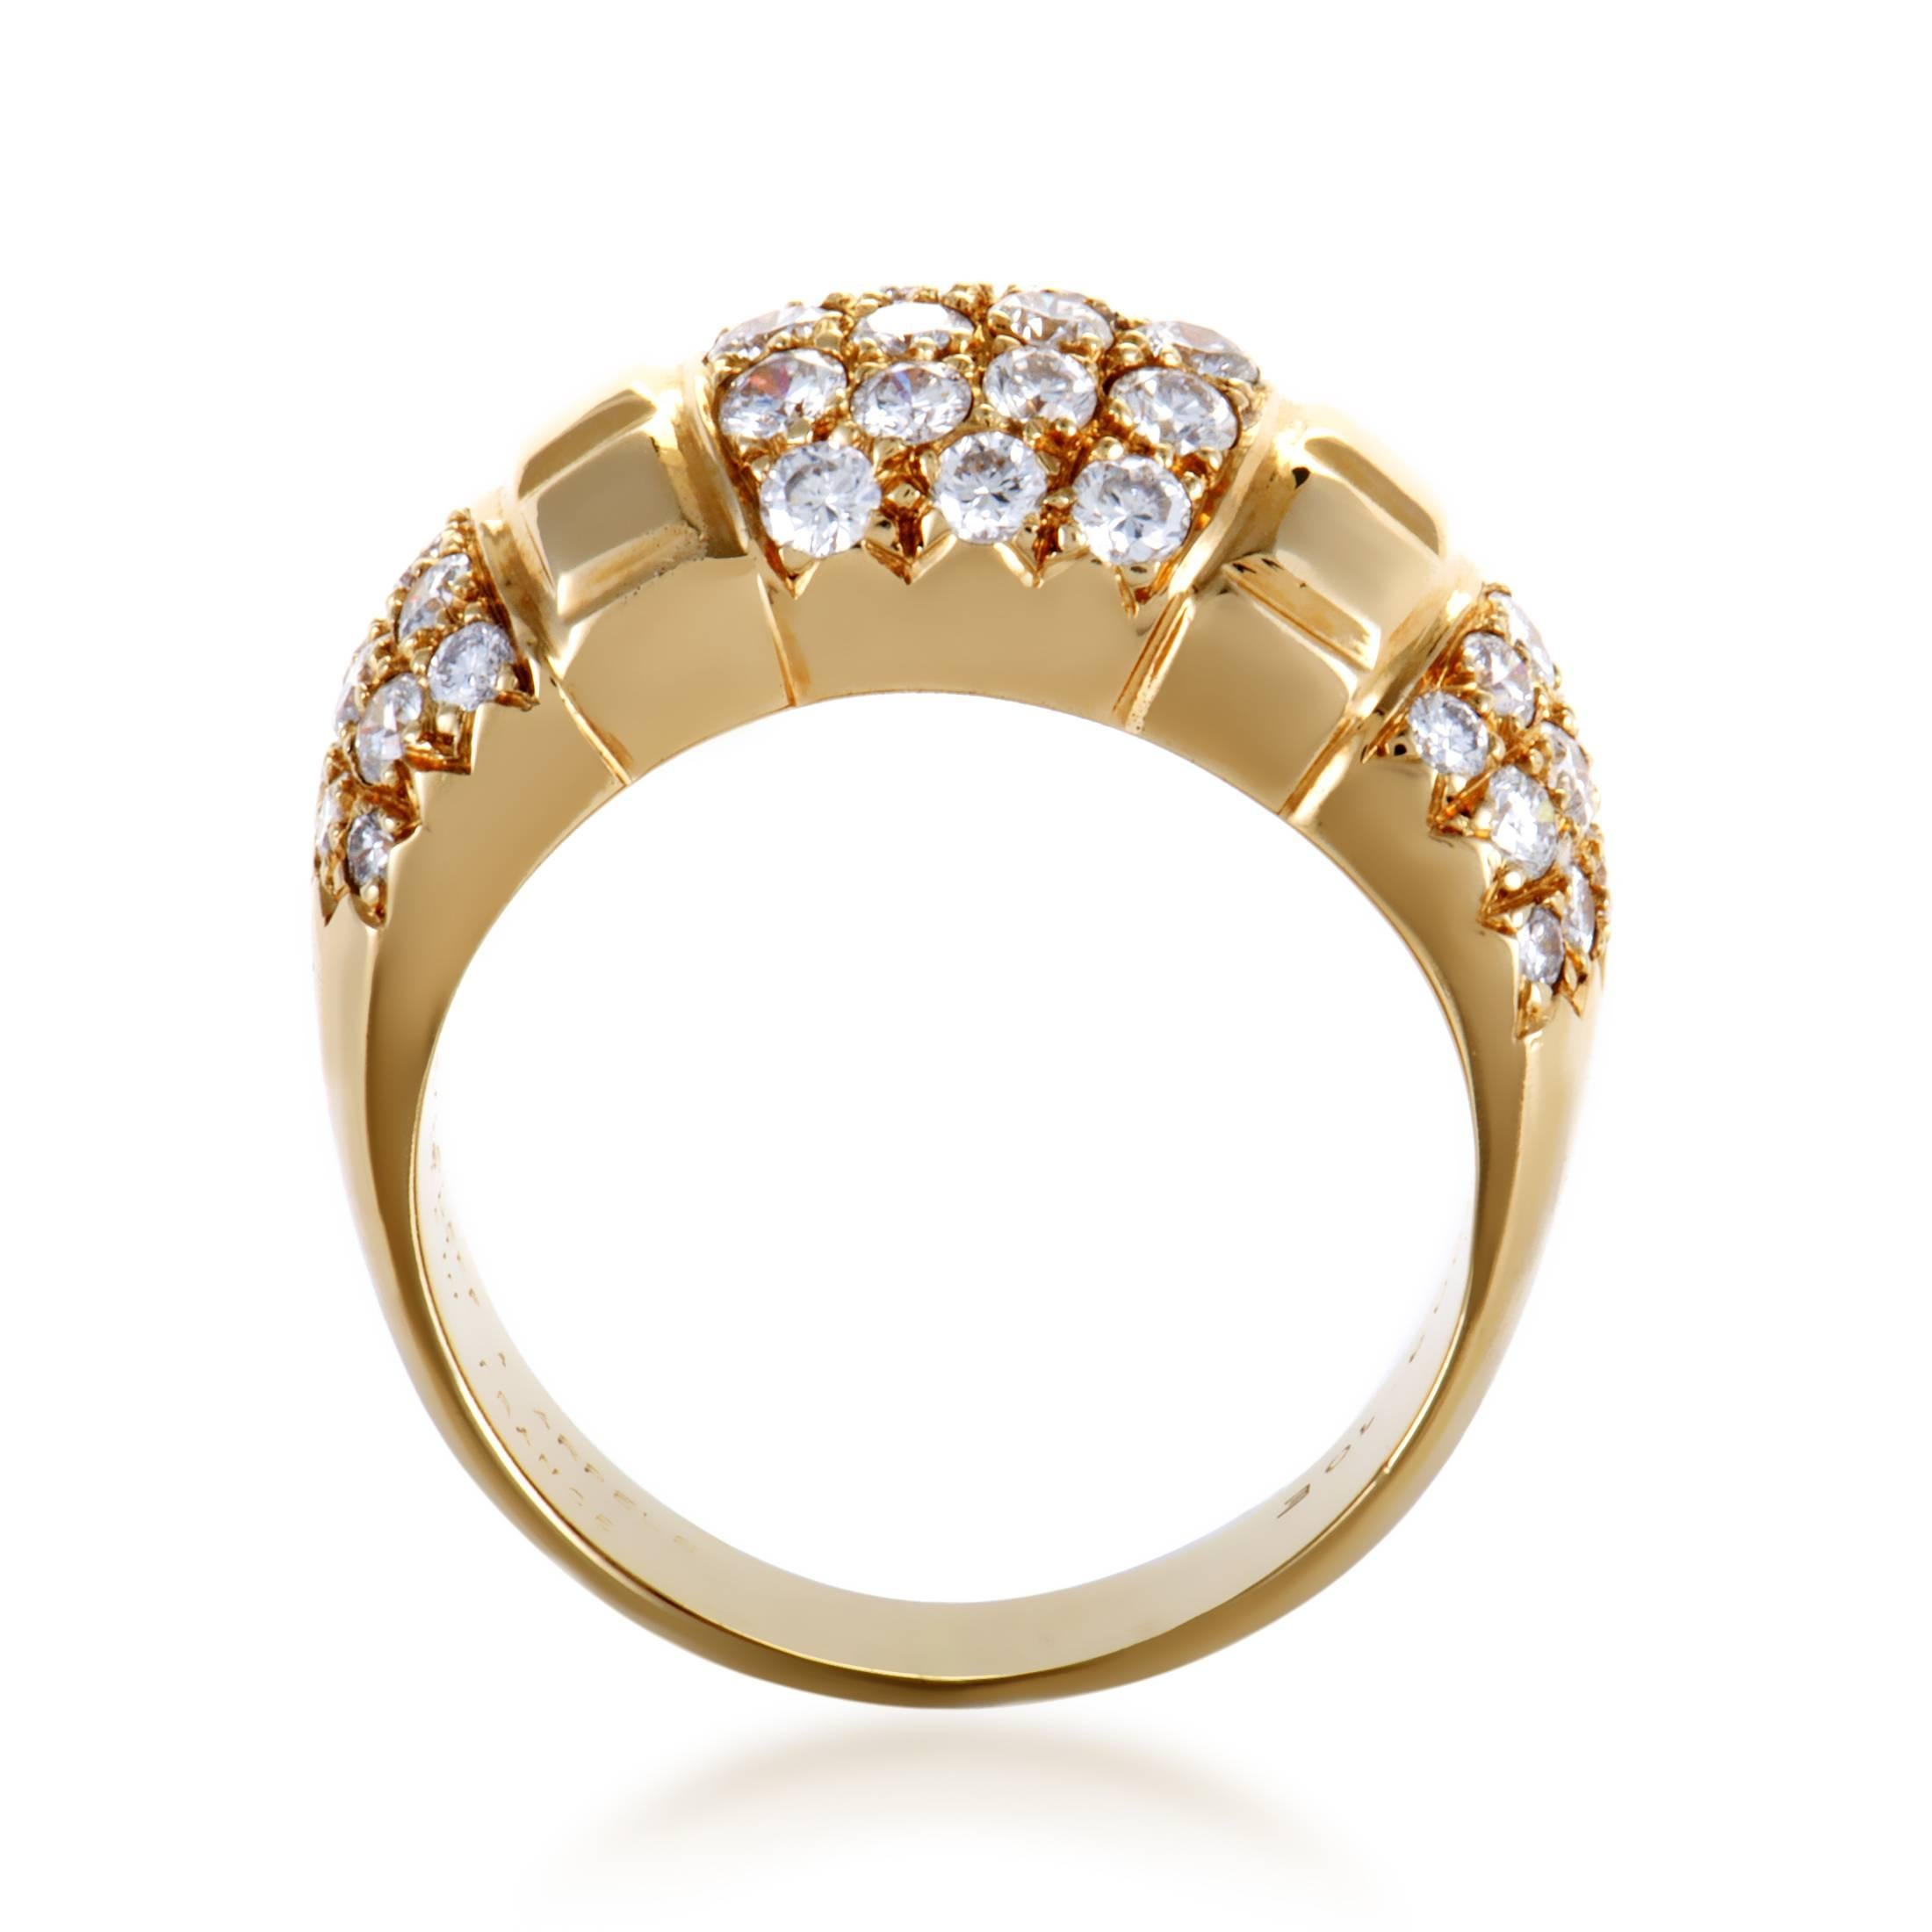 Elegant simplicity, tasteful exuberance and prestigious excellence produce an irresistible allure in this gorgeous ring from Van Cleef & Arpels which boasts 1.75 carats of tantalizing diamonds against fabulous 18K yellow gold.
Included Items: